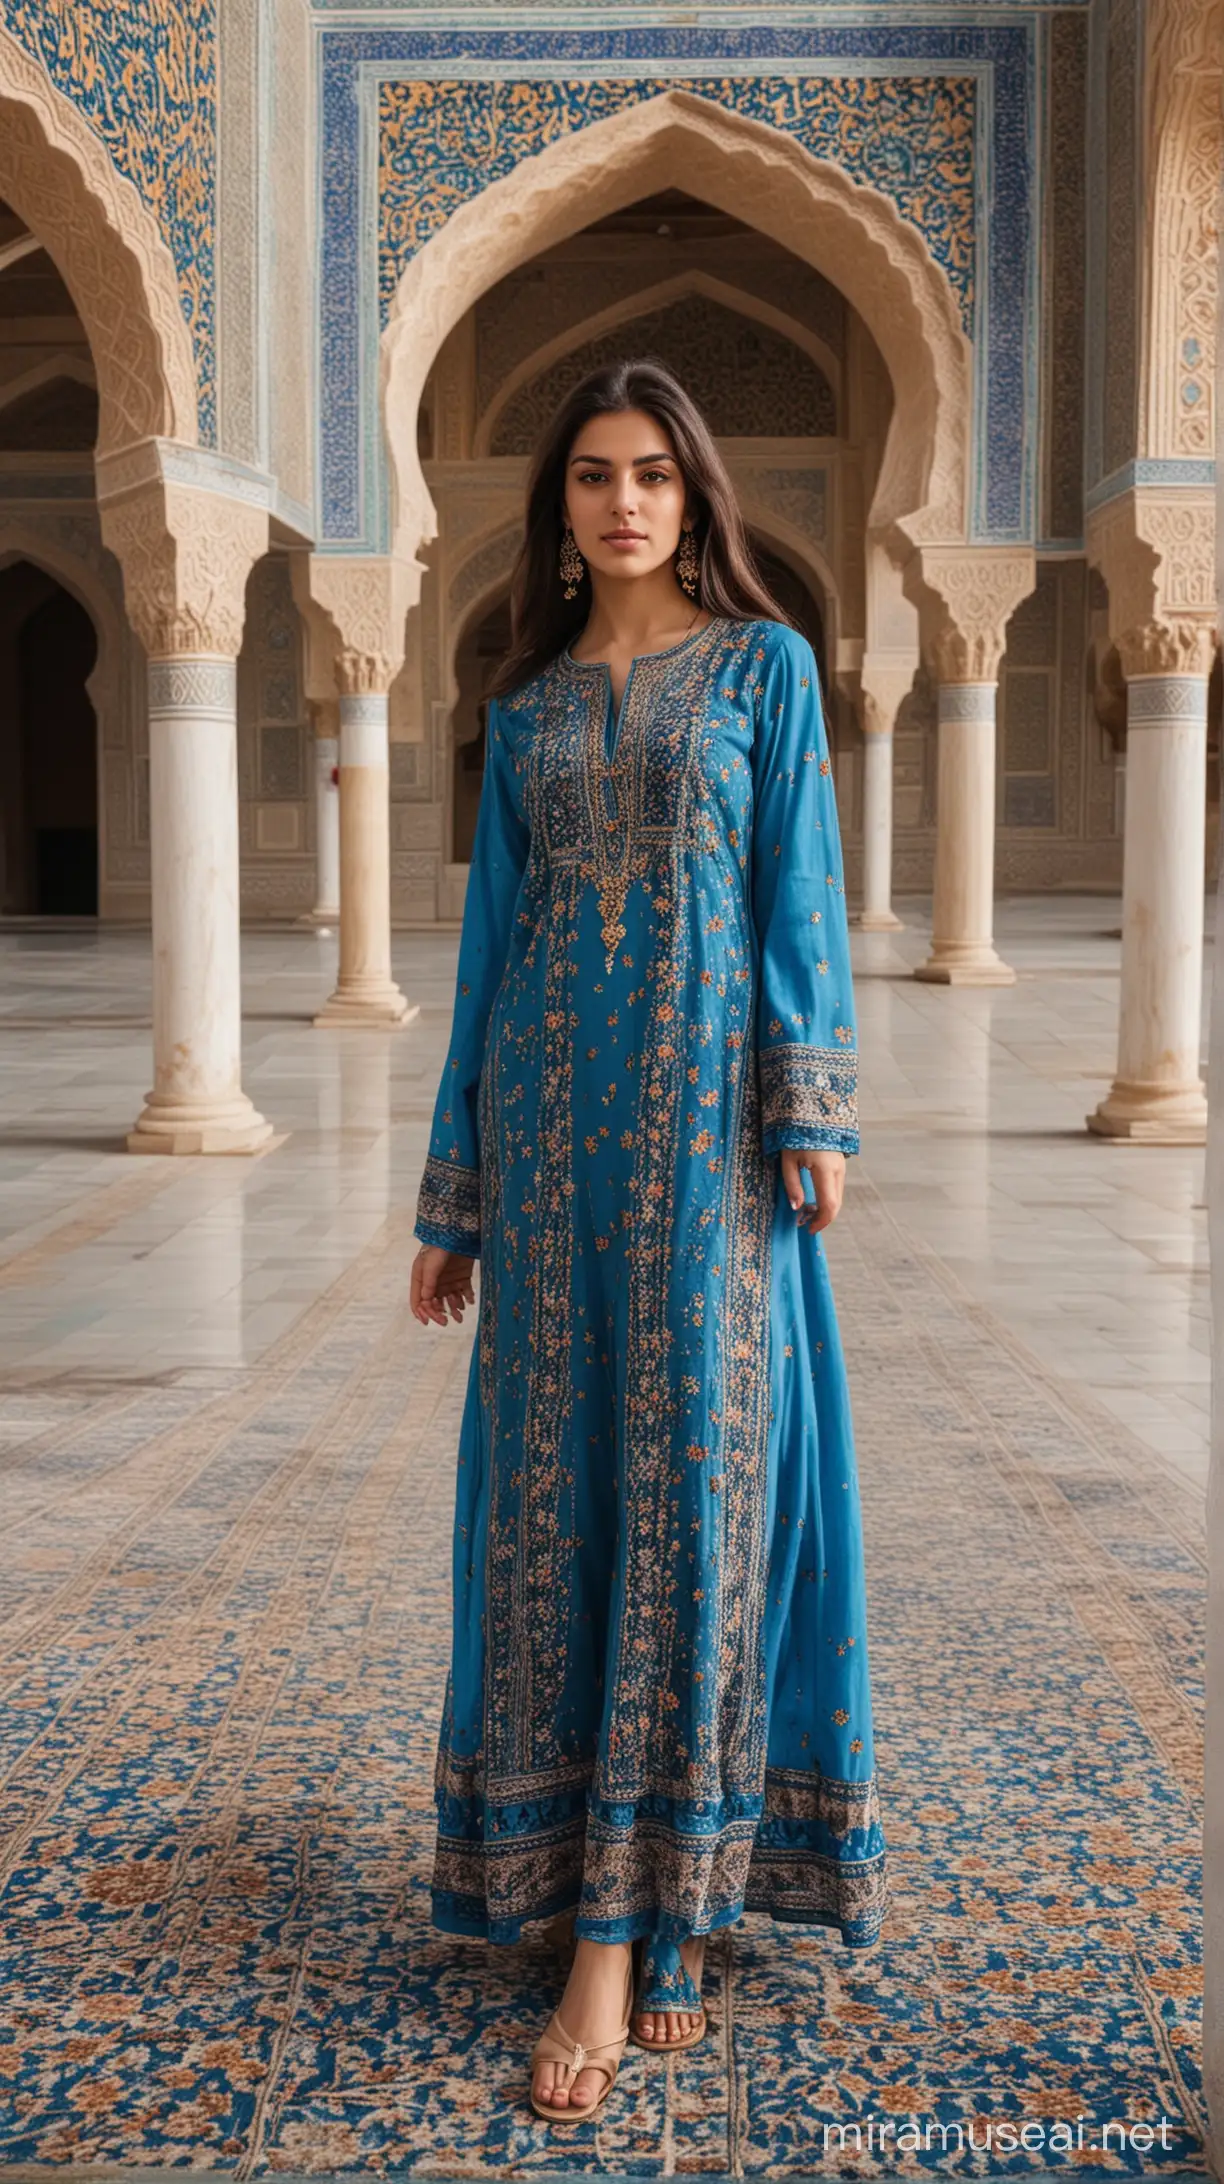 beautifull persian girl with blue persian dress standing in the middle of the courtyard of the Iranian mosque